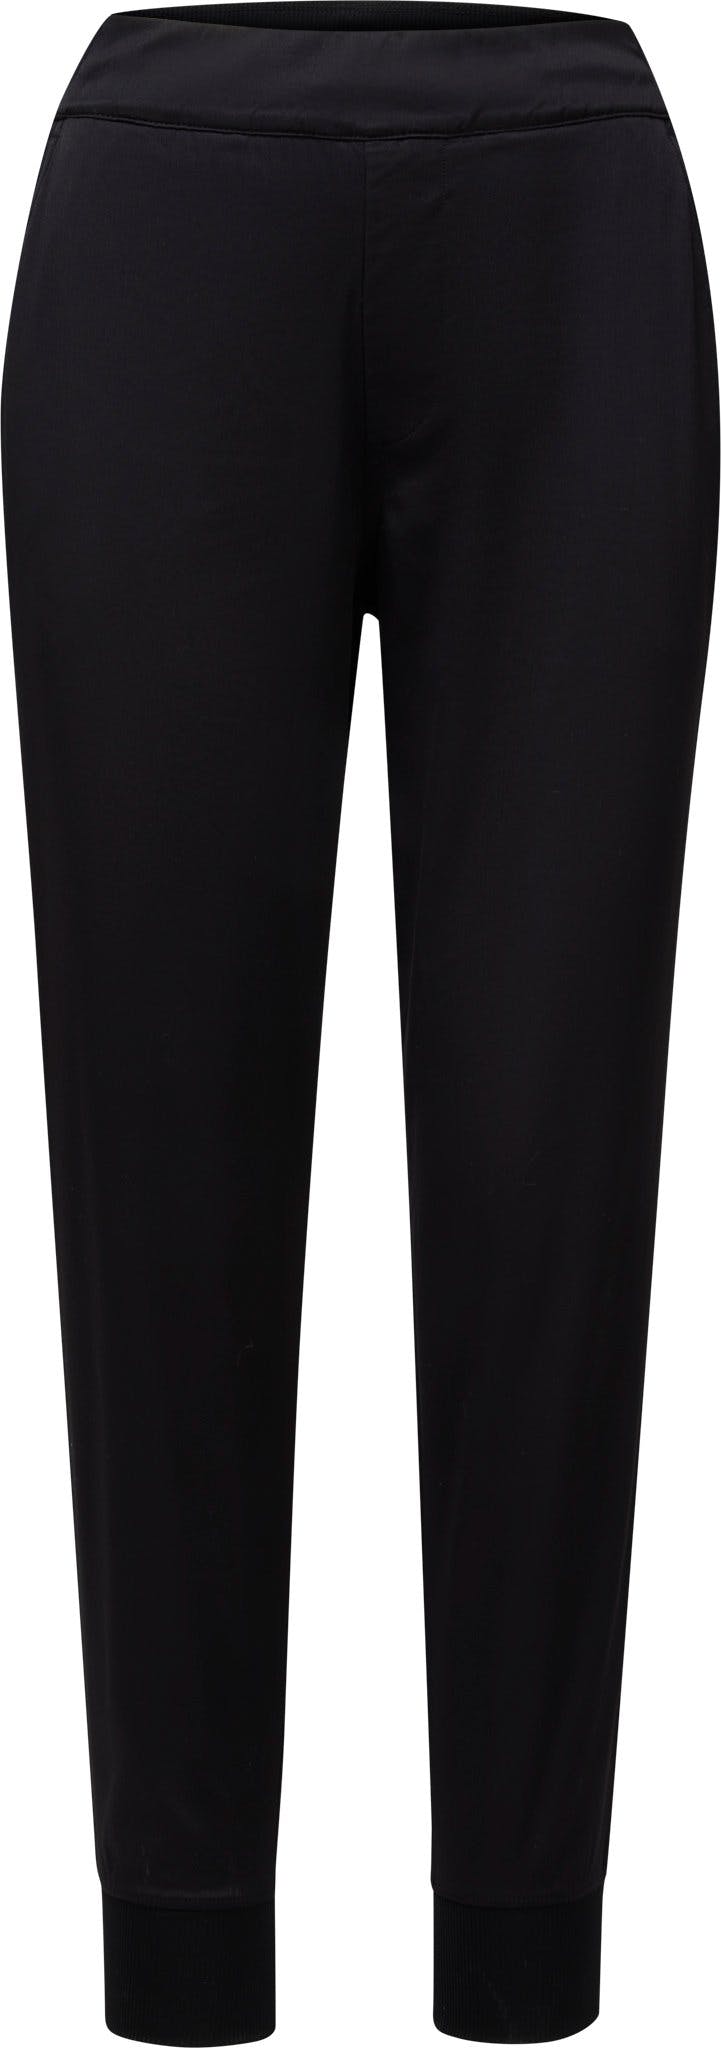 Product image for Aphrodite Jogger - Women's